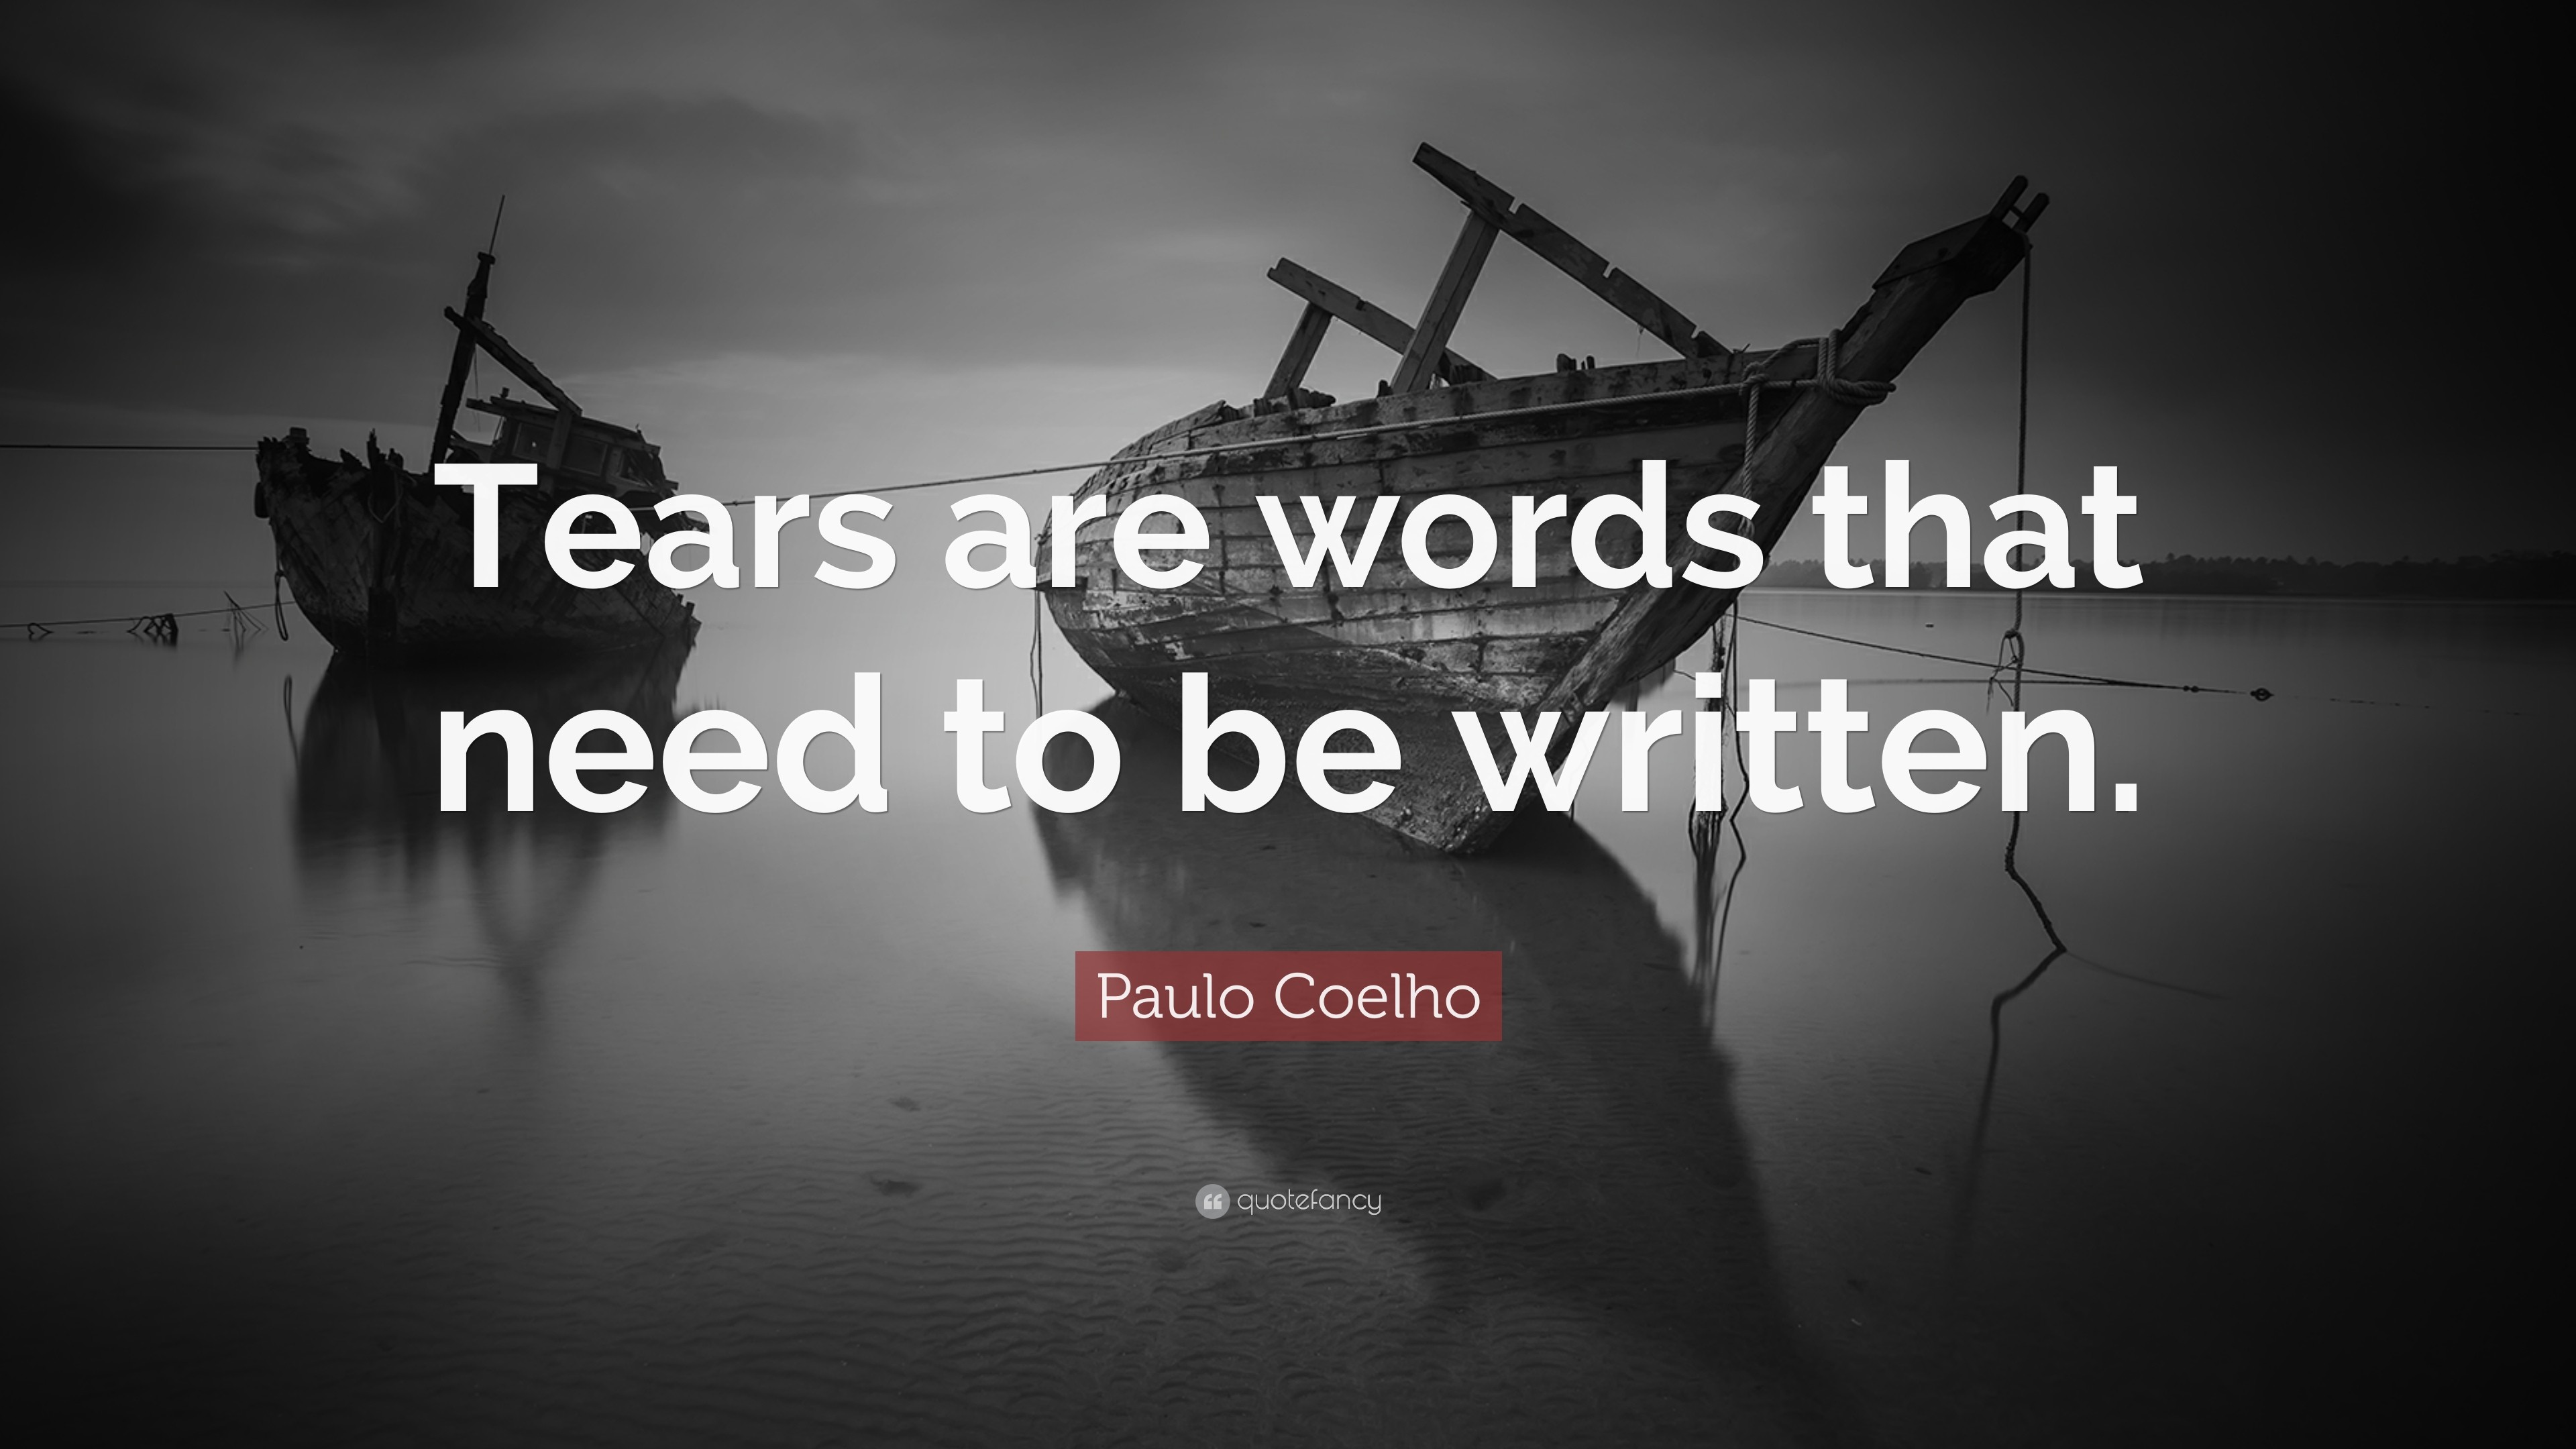 3840x2160 Paulo Coelho Quote: “Tears are words that need to be written.”